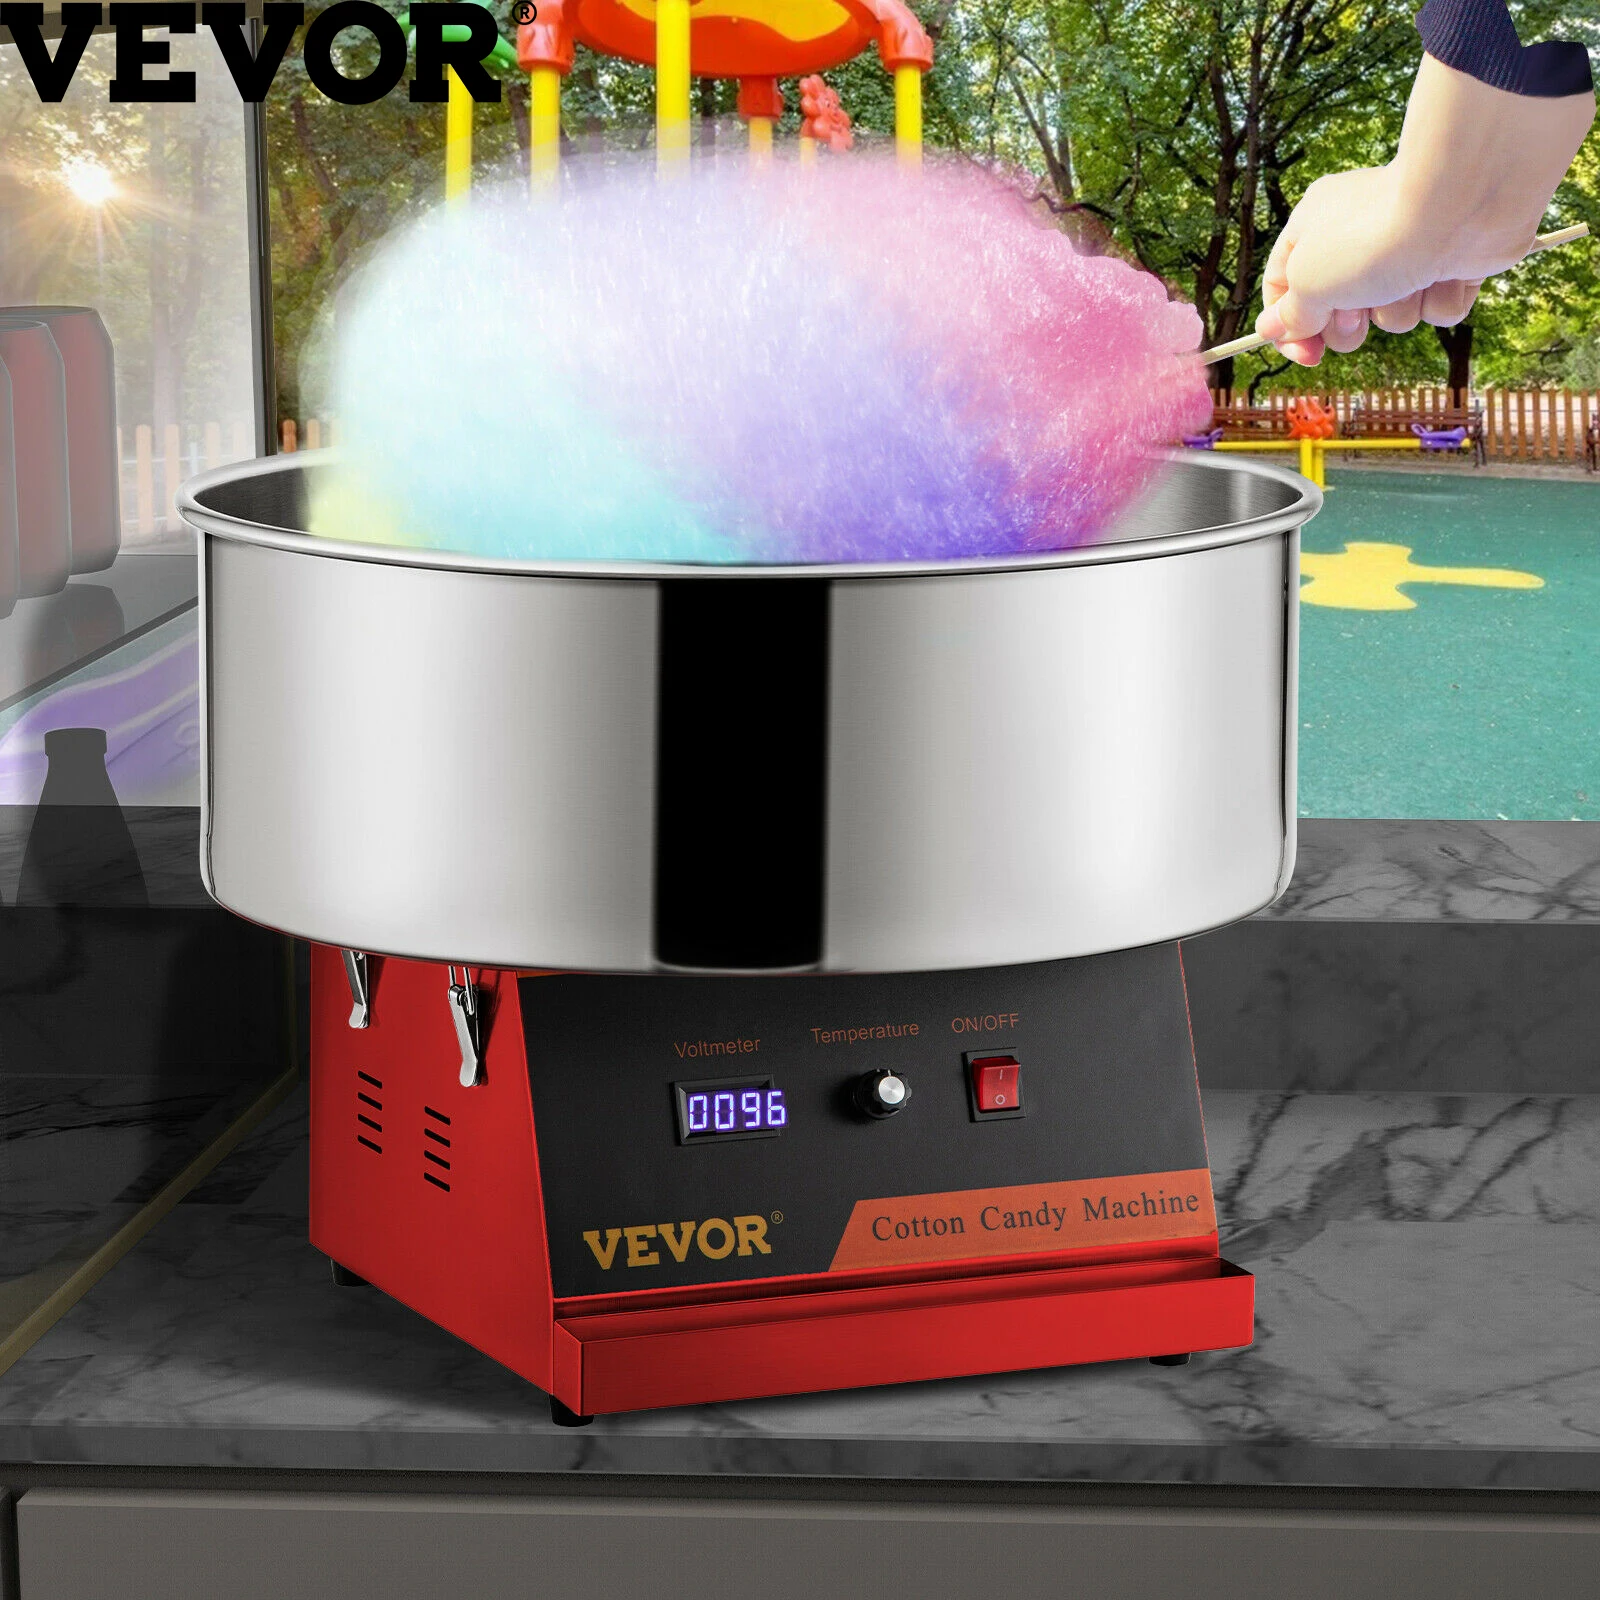 VEVOR Electric Cotton Candy Machine Commercial Candy Floss Maker 1050W for Festivals Carnivals Birthday Parties Sports Events